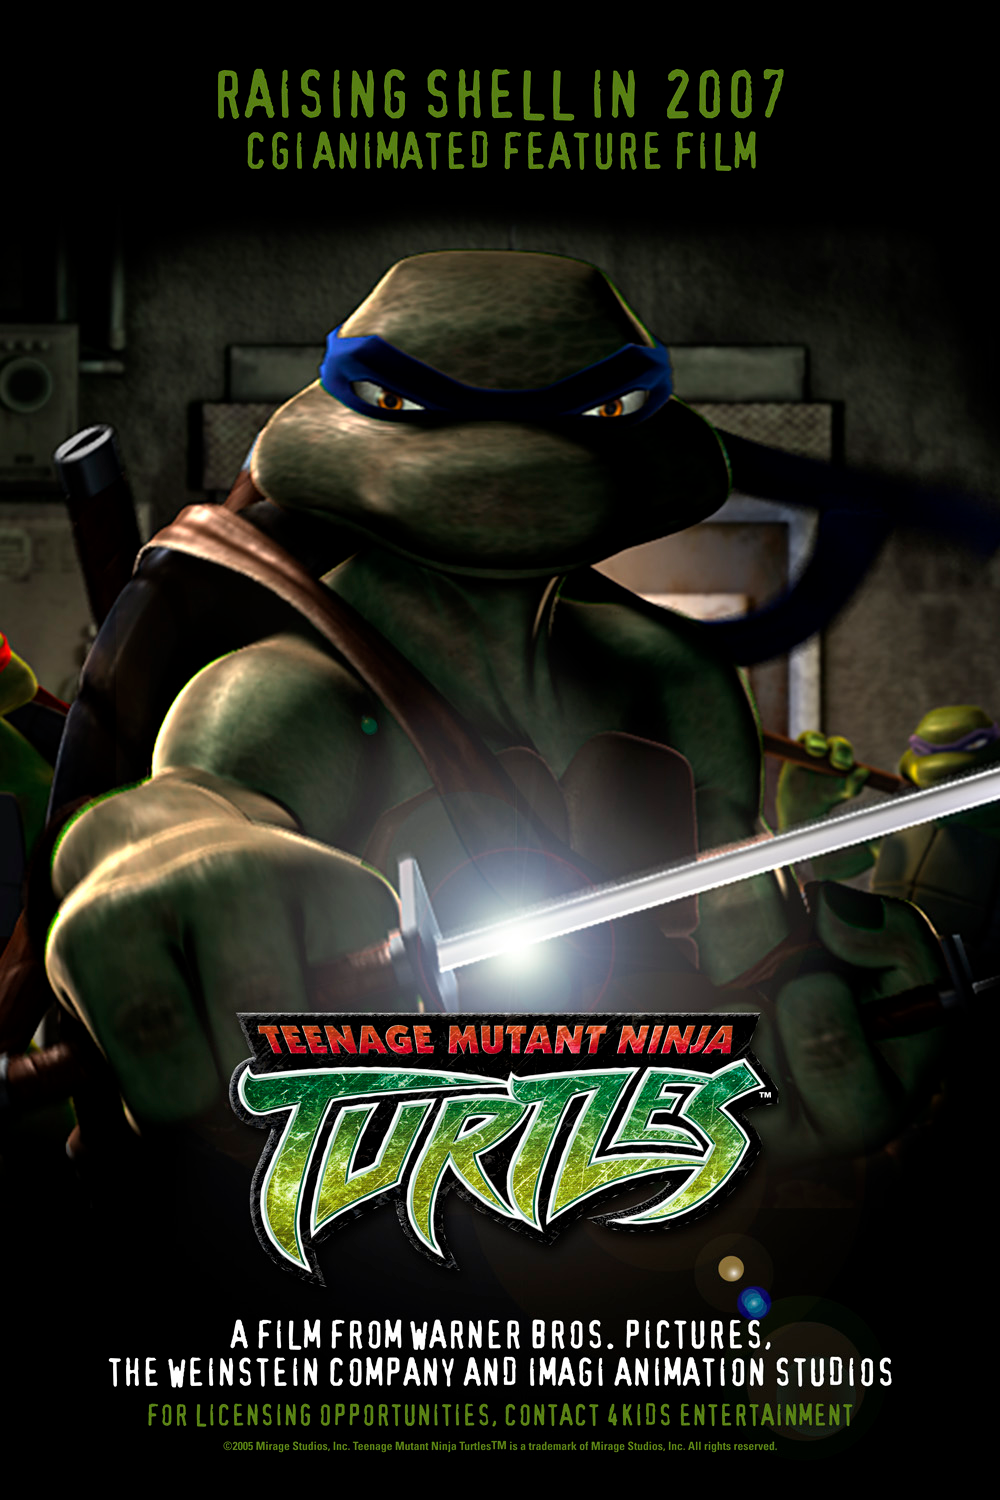 https://static.wikia.nocookie.net/tmnt/images/1/12/Hhtrehthre.png/revision/latest?cb=20140316000228